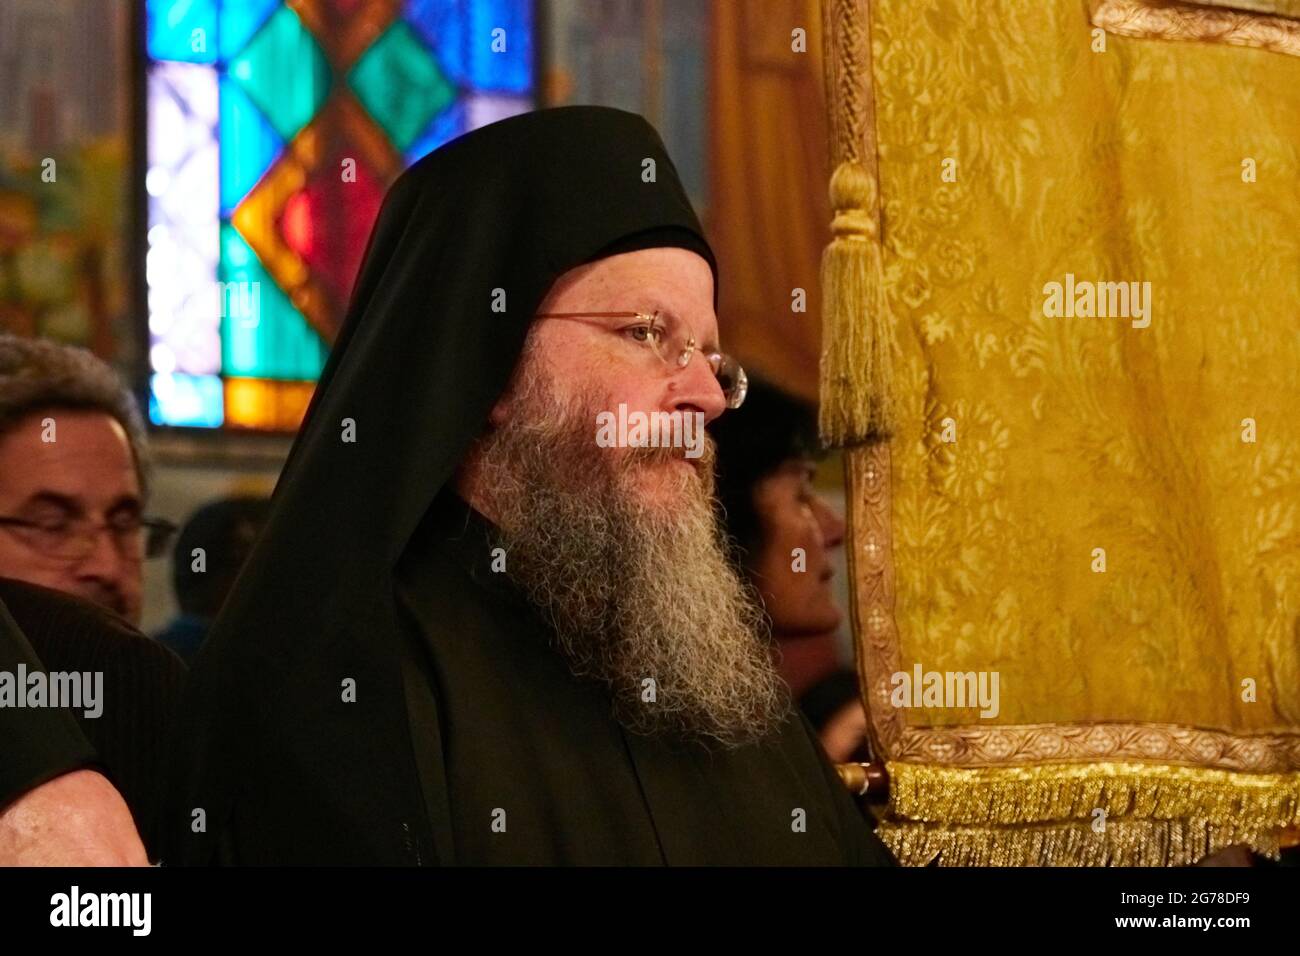 Ionian Islands, Zakynthos, Zakynthos Town, Church of Saint Dionysius, Feast of Saint Dionysius on December 17th, clergyman, dressed in black, with black headgear, long beard and glasses in profile Stock Photo